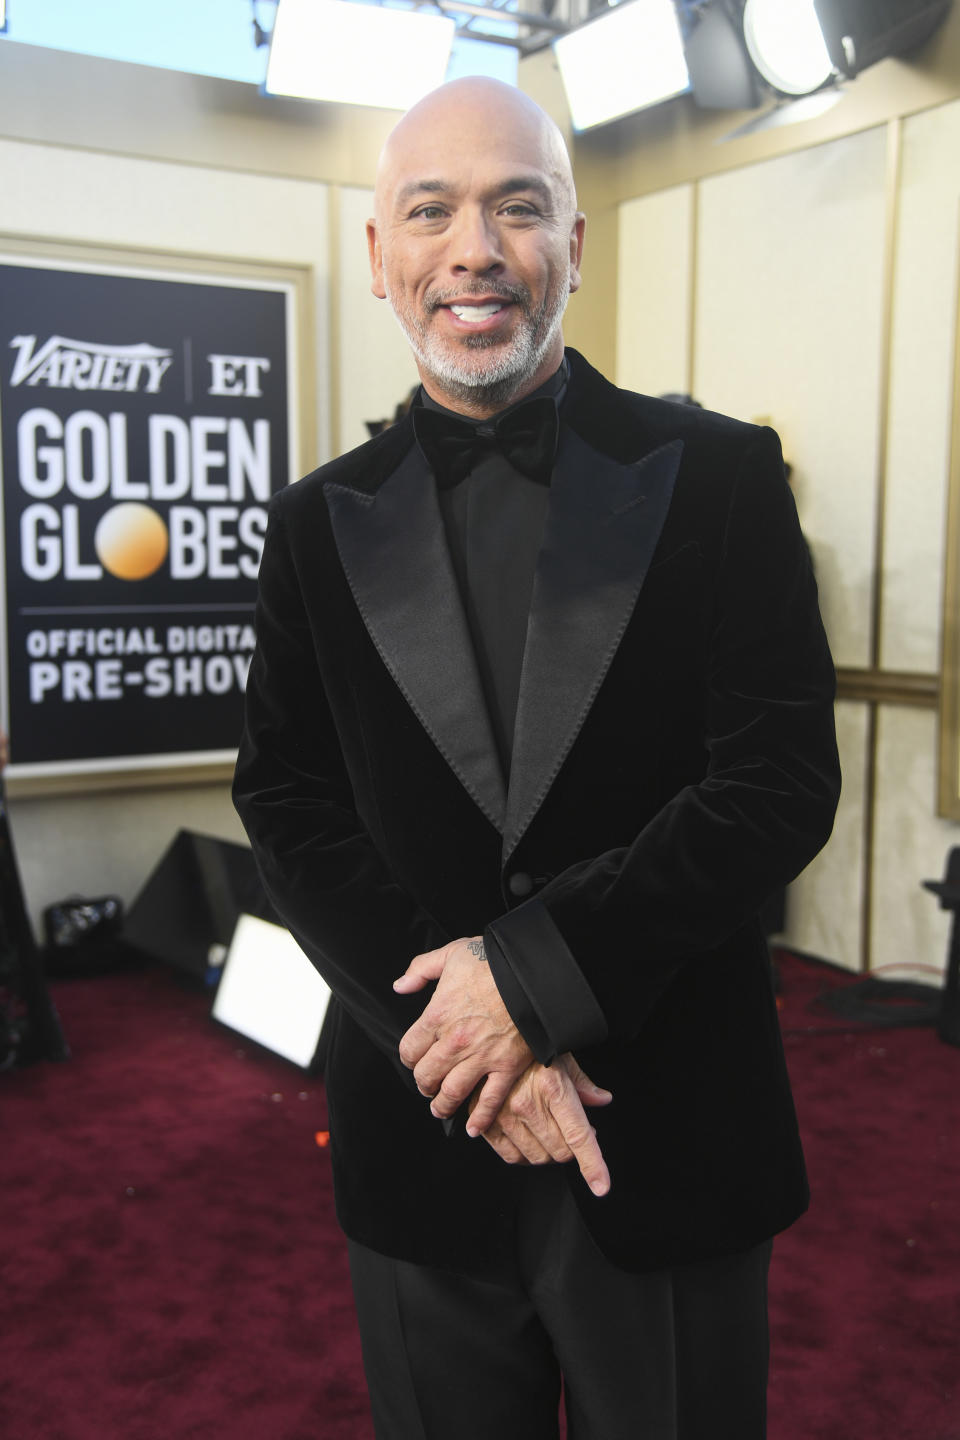 Jo Koy at the 81st Golden Globe Awards held at the Beverly Hilton Hotel on January 7, 2024 in Beverly Hills, California. (Photo by Alberto Rodriguez/Golden Globes 2024/Golden Globes 2024 via Getty Images)